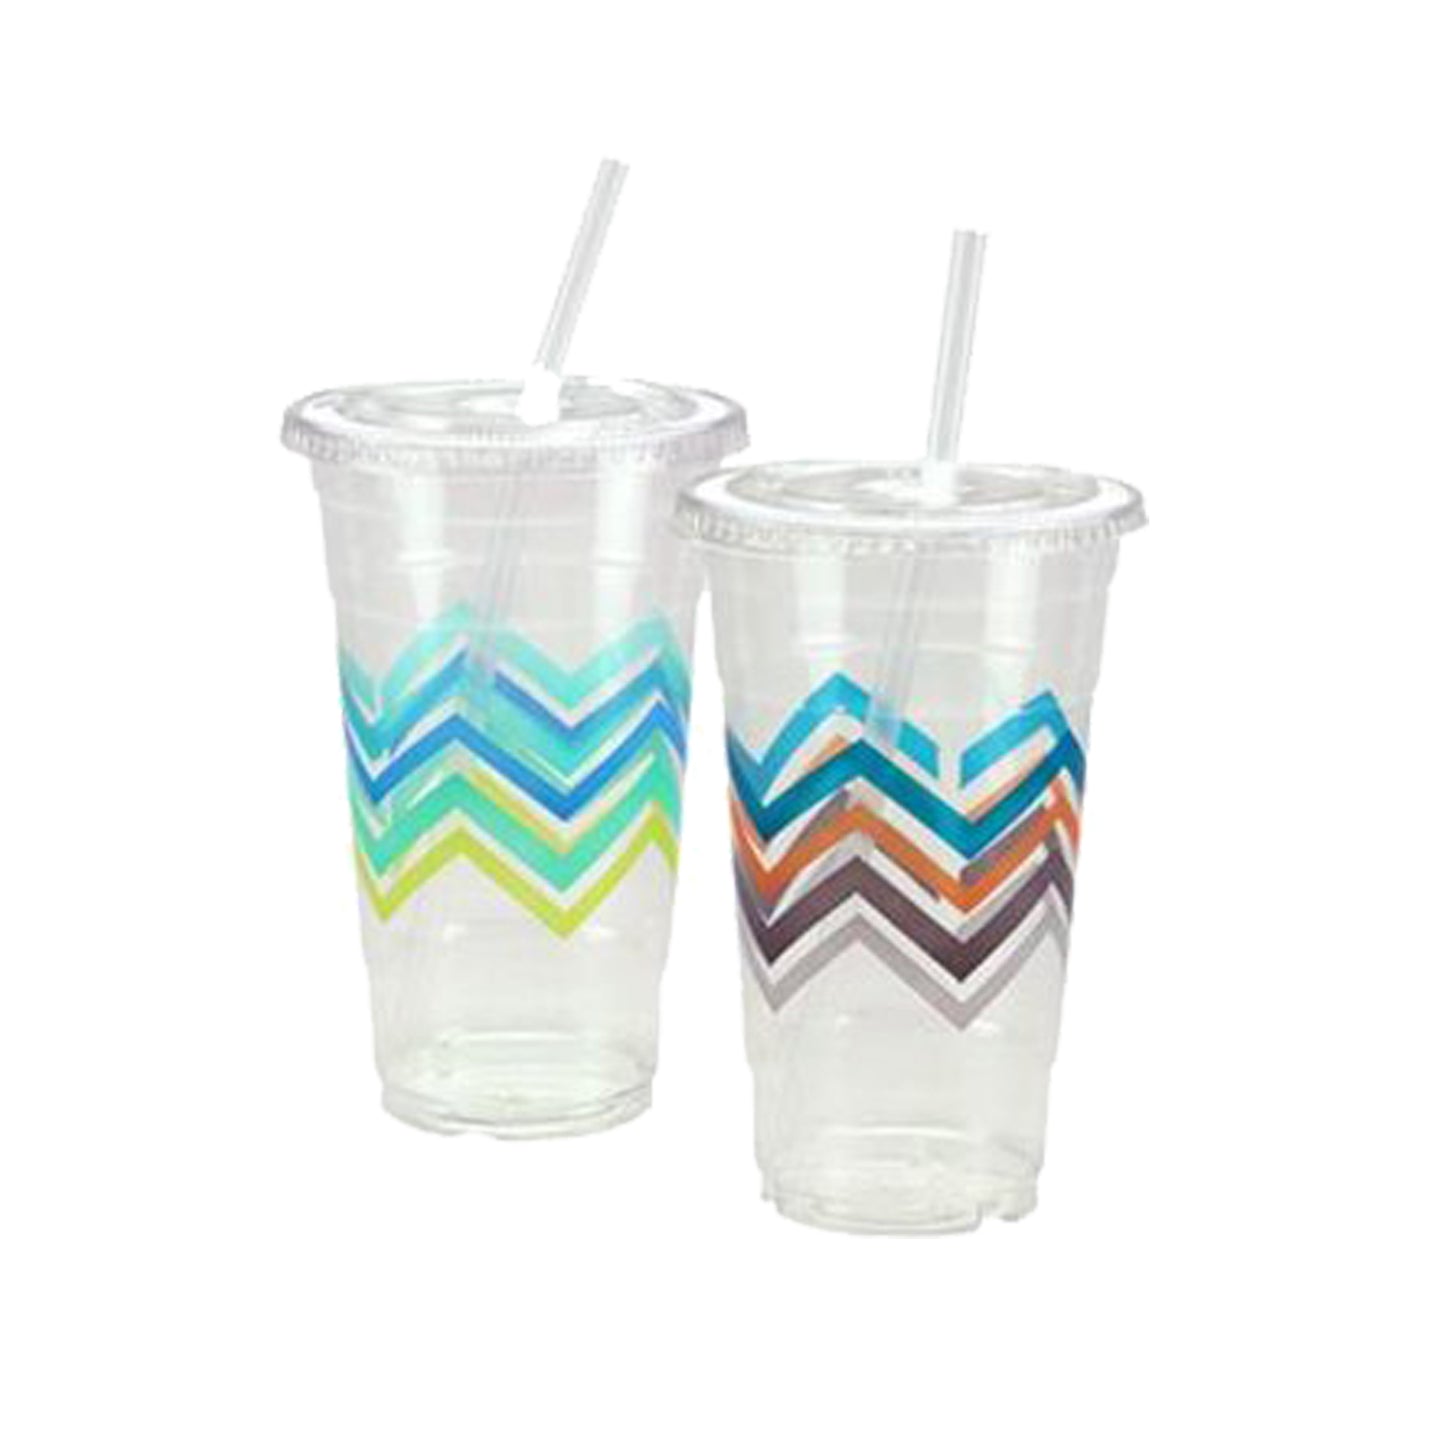 Nicole home Collection Premium Plastic Chevron Cups with Lids and Straws 24 oz Smoothie Cups OnlyOneStopShop   